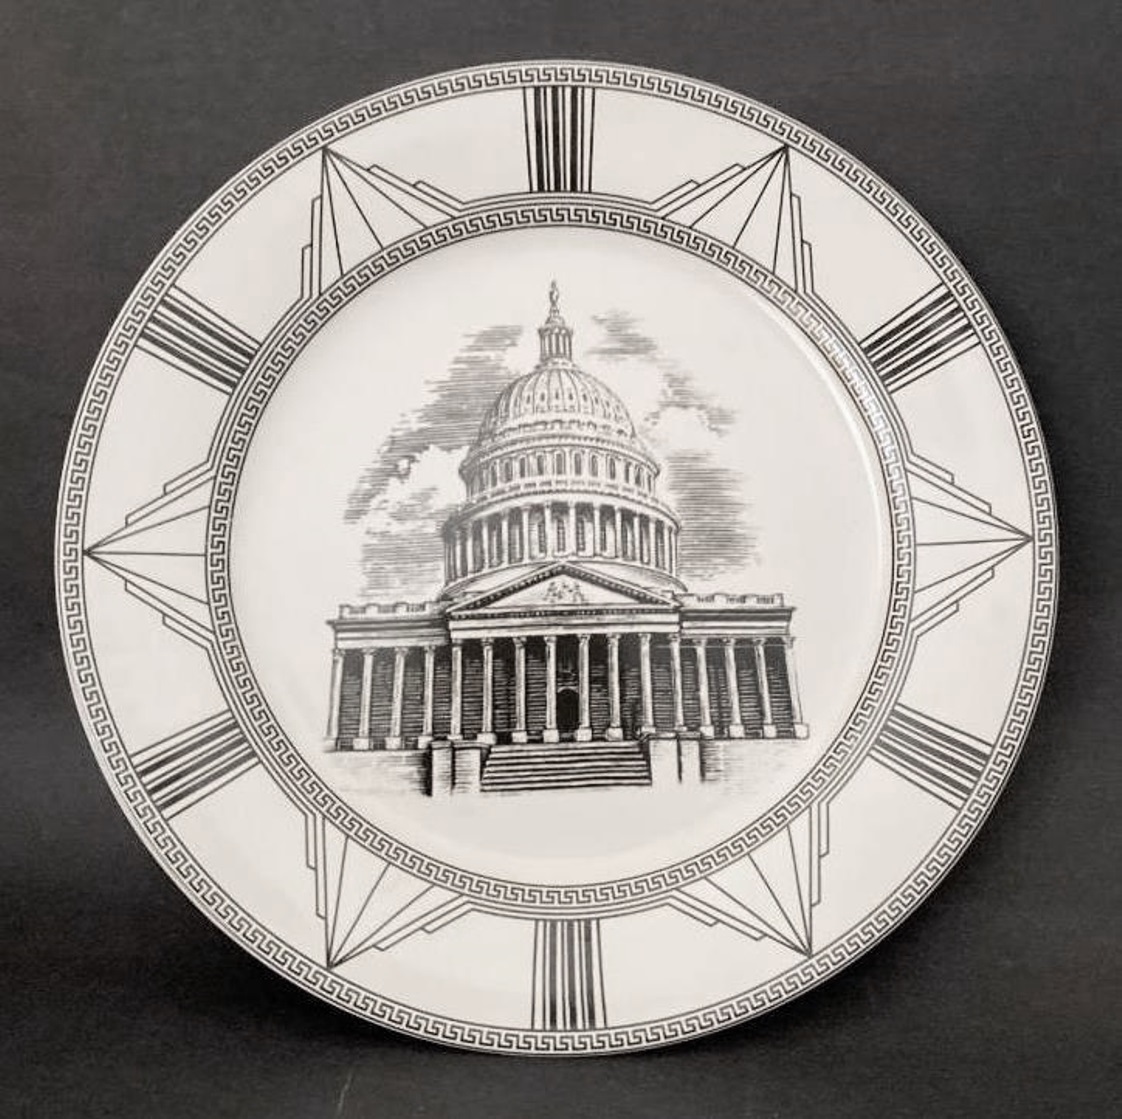 Primary image for Royal Norfolk THE WHITE HOUSE decorative collectible plate 7-1/4 inches diameter